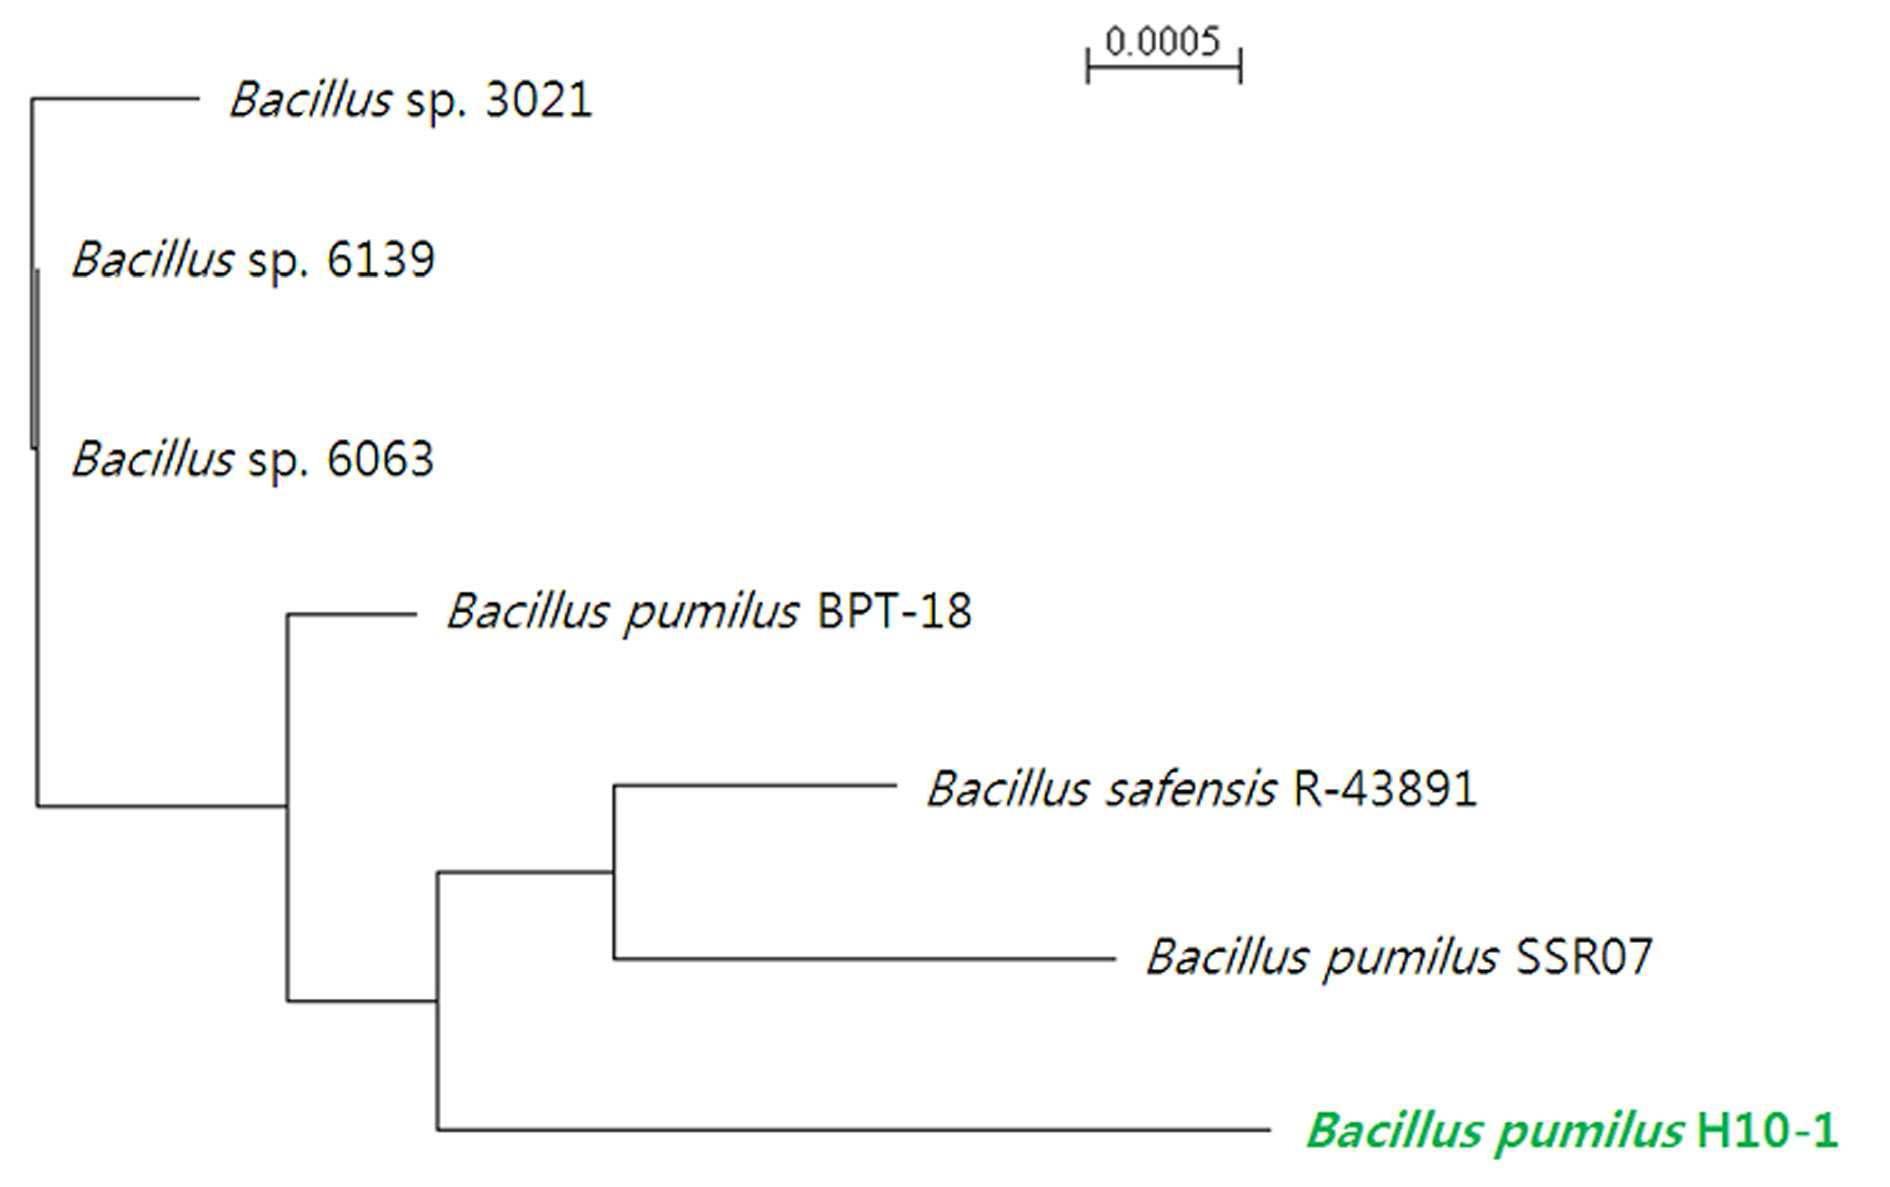 Phylogenetic relationship of isolated H10-1 strain with other Bacillus species based on partial 16S rDNA gene sequences.